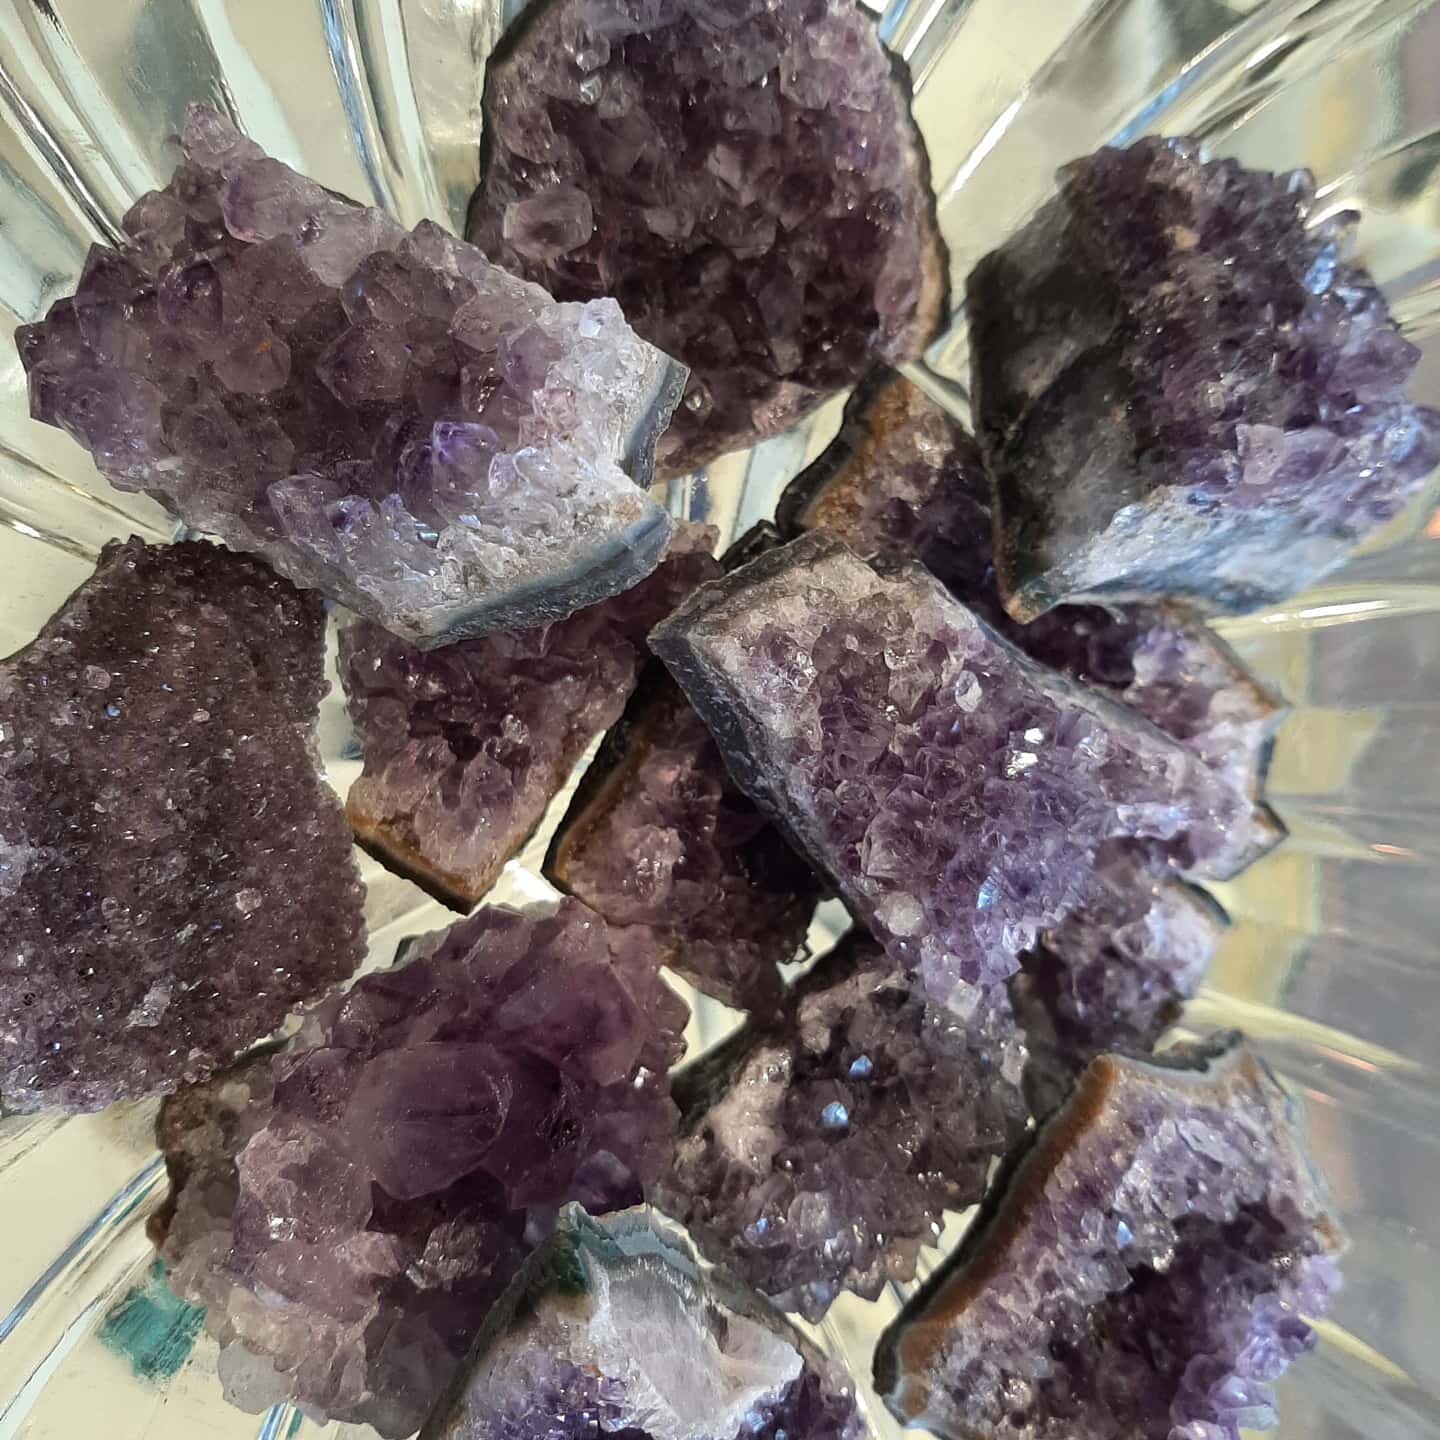 💚One FREE Amethyst cluster with every purchase today to spread a little LOVE!💚 (while supplies last)

#coloradocrystalcurio #rockshop #paoniacolorado #highway133 #amethyst #happyvalentinesday #wearelove